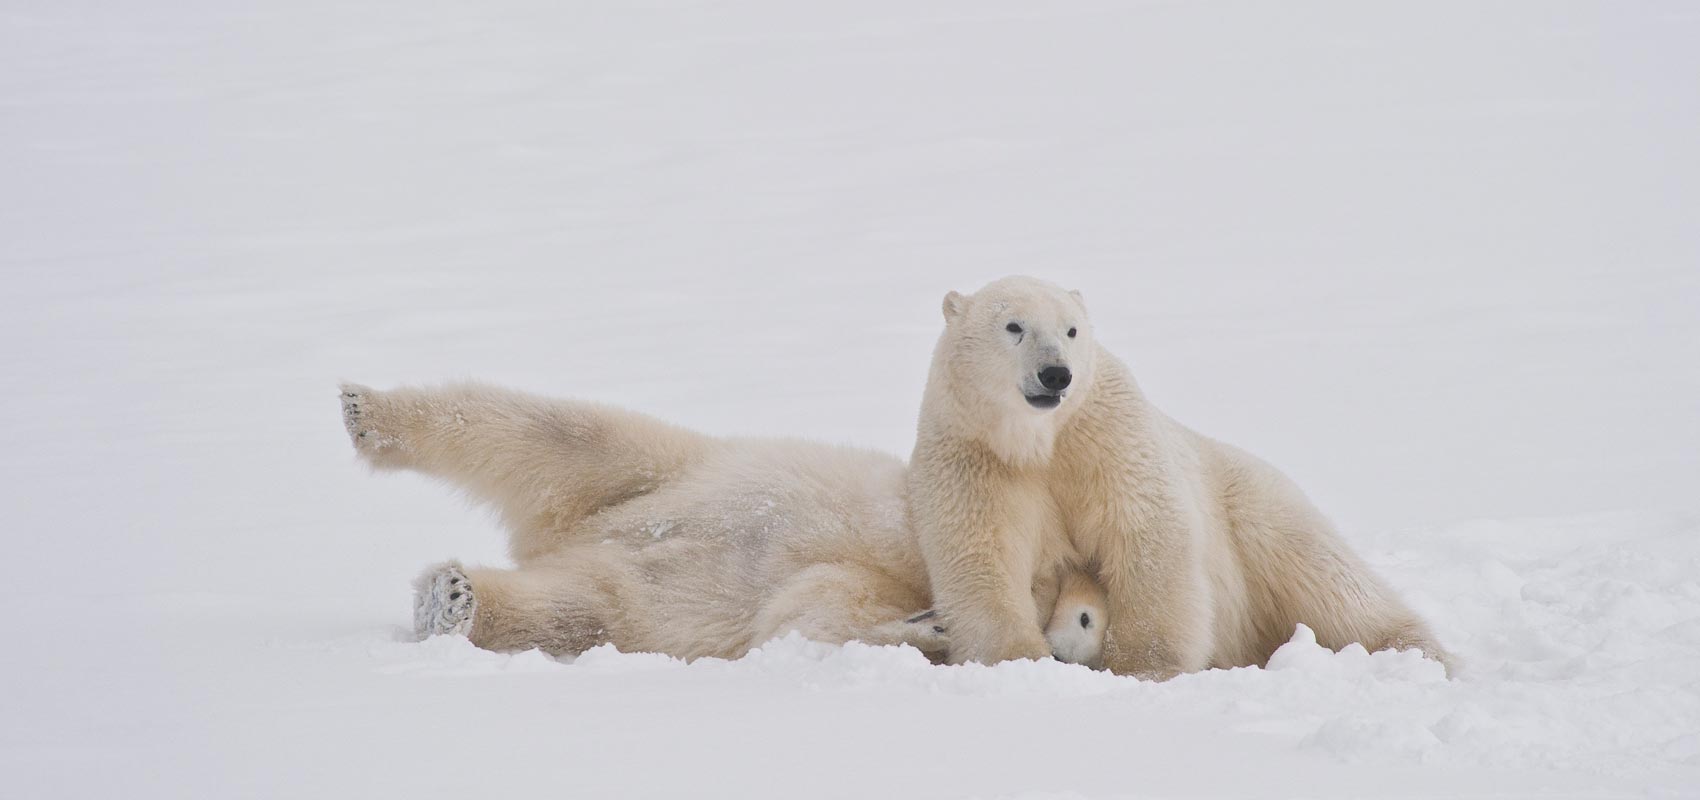 Gettin’ Busy: The awesome drama of how polar bears mate